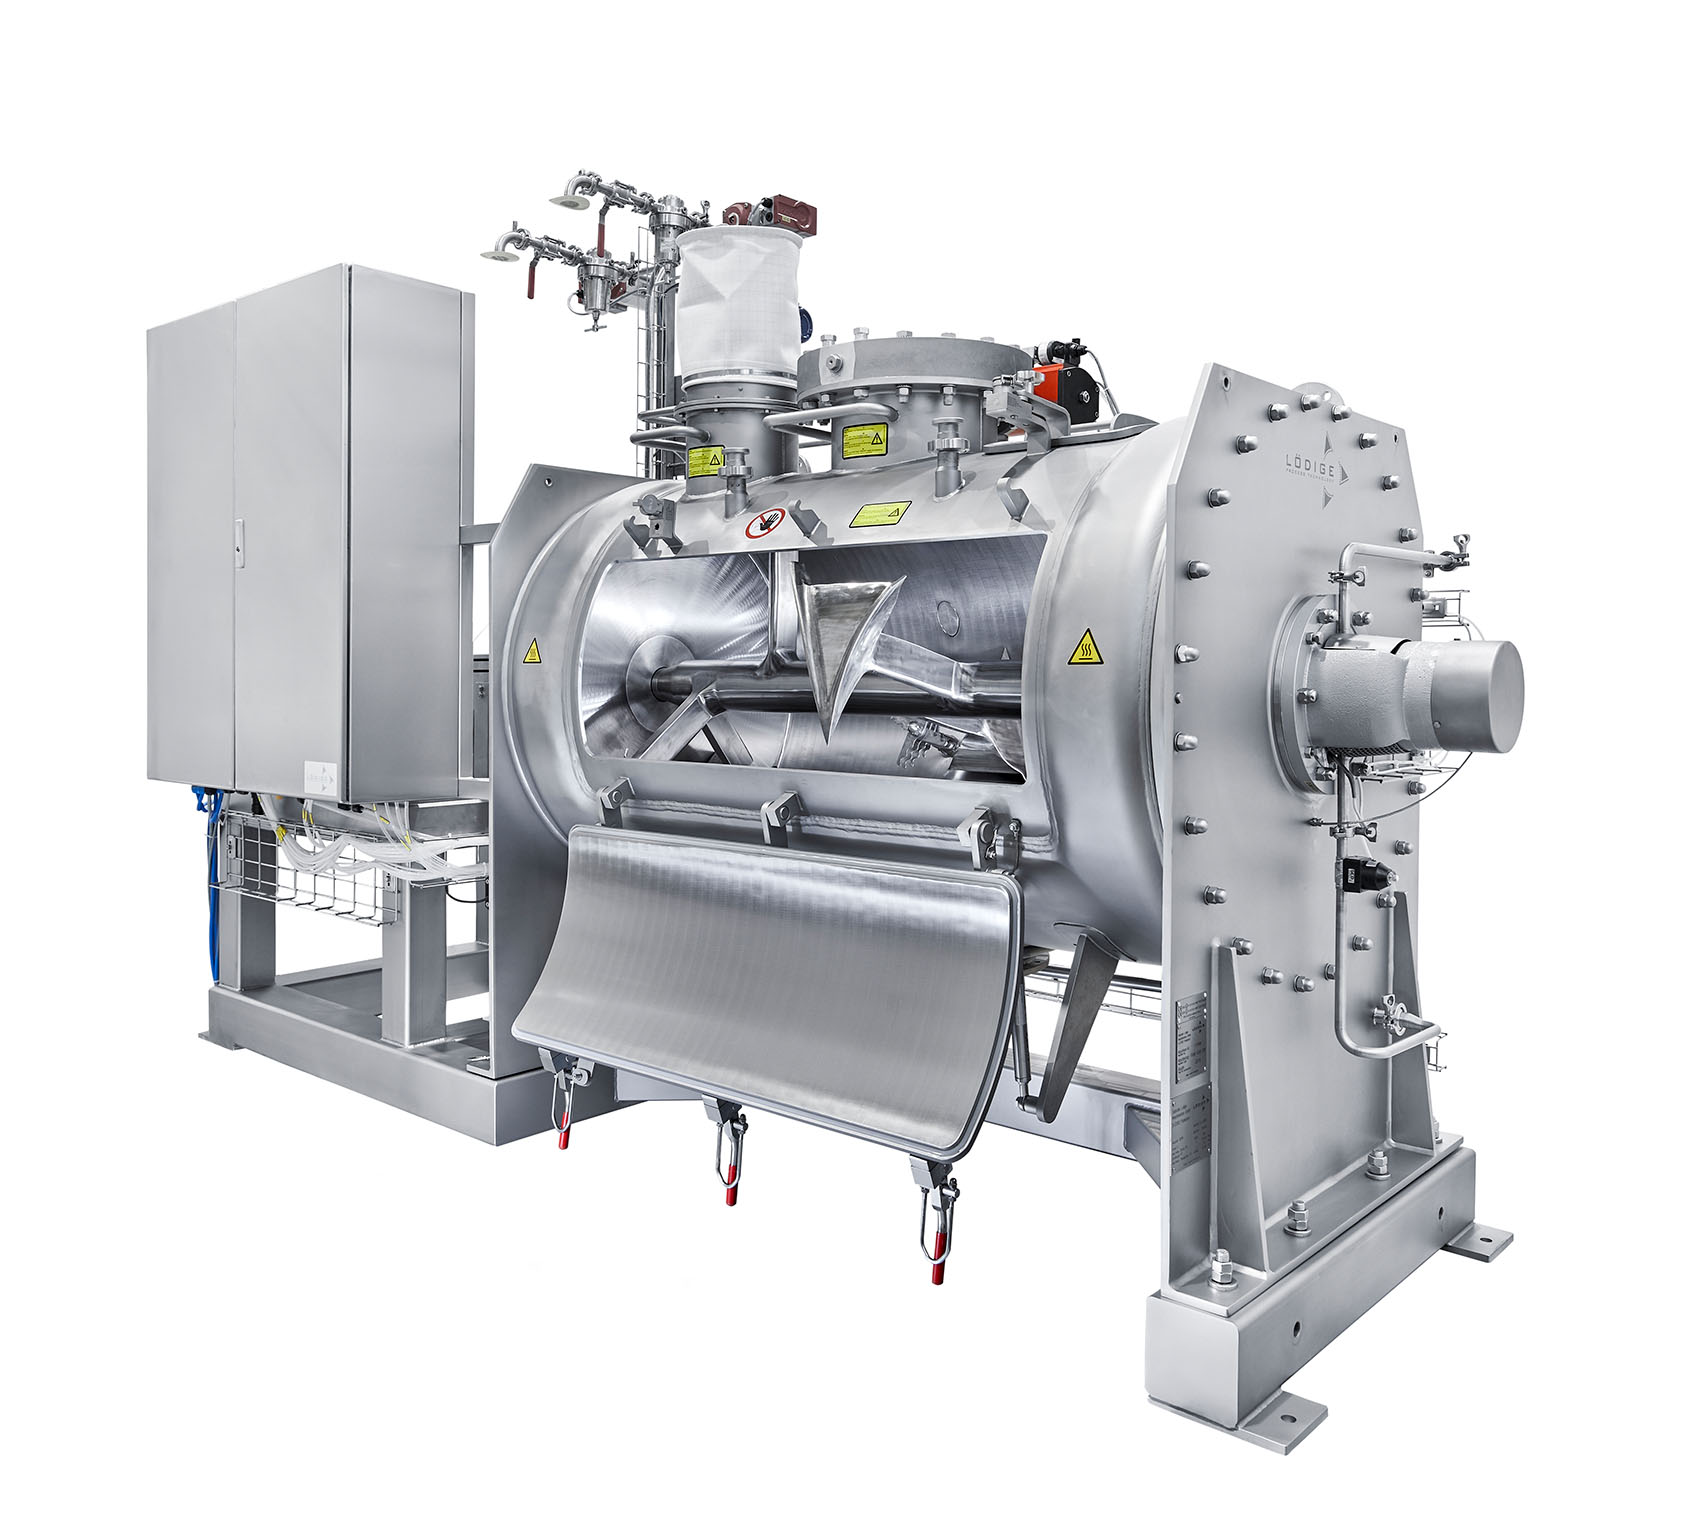 Lödige machine for the production of meat substitute products